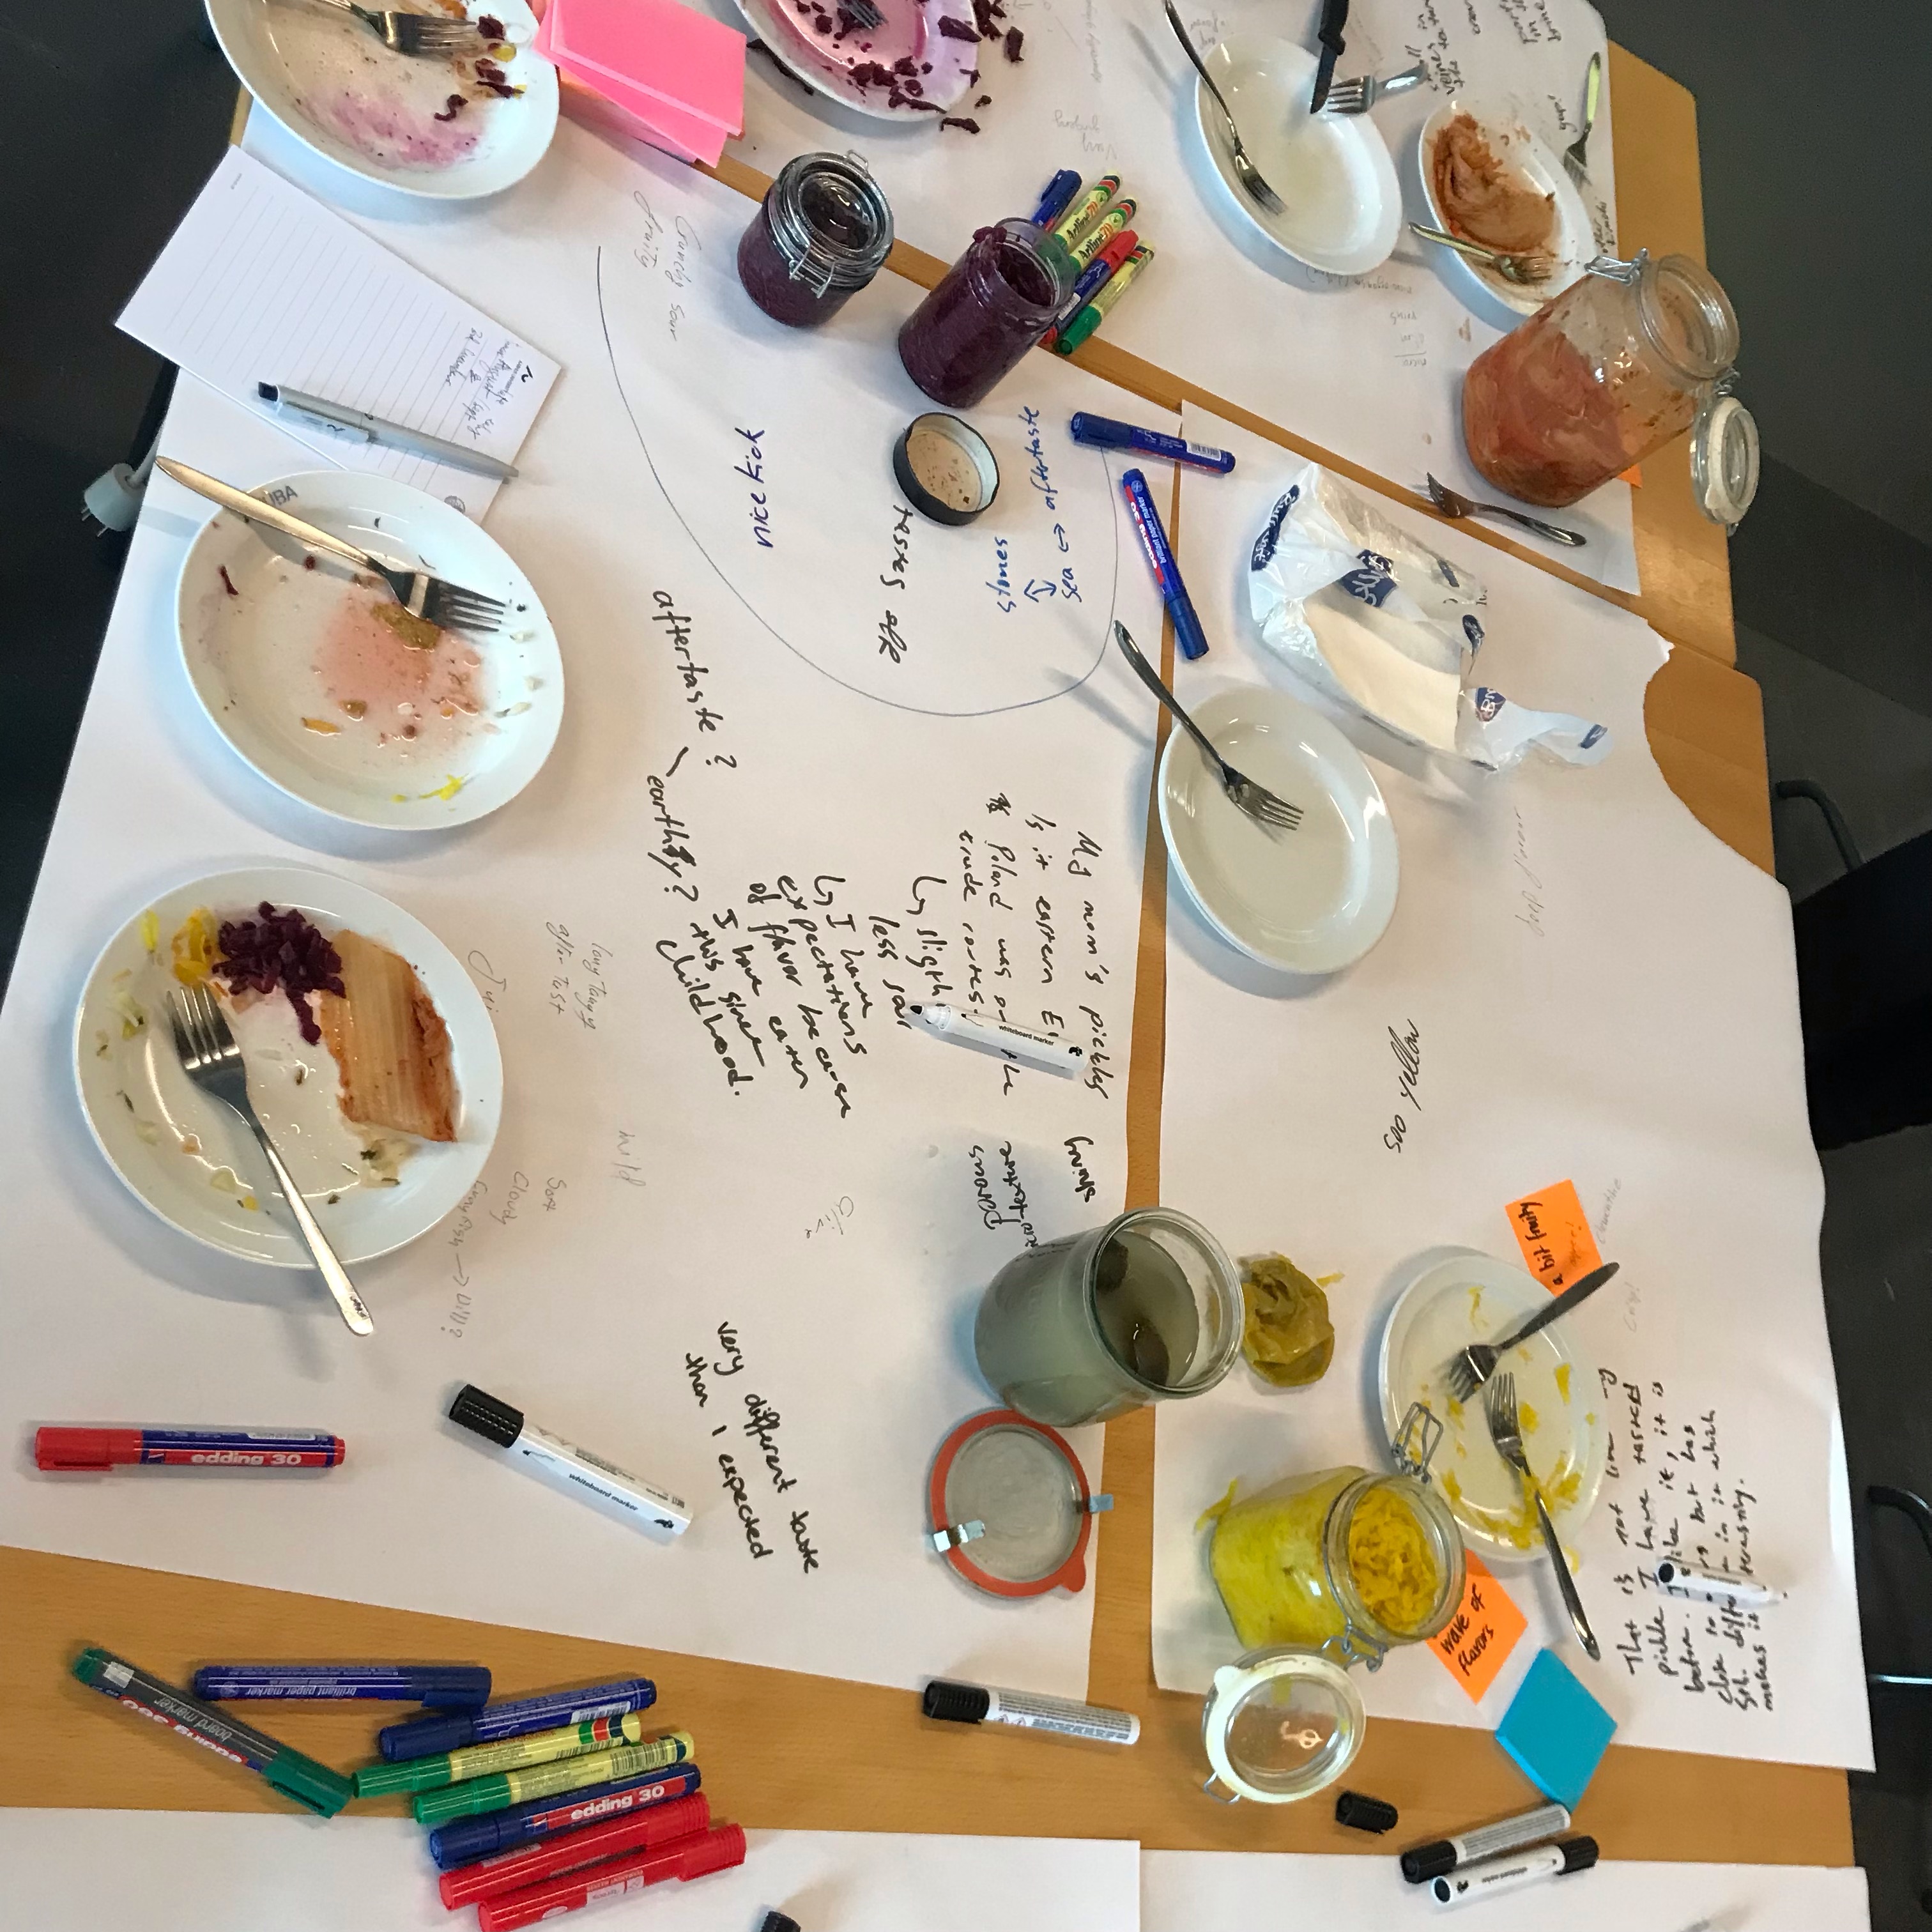 tasting table image with ferment jars and participant notes